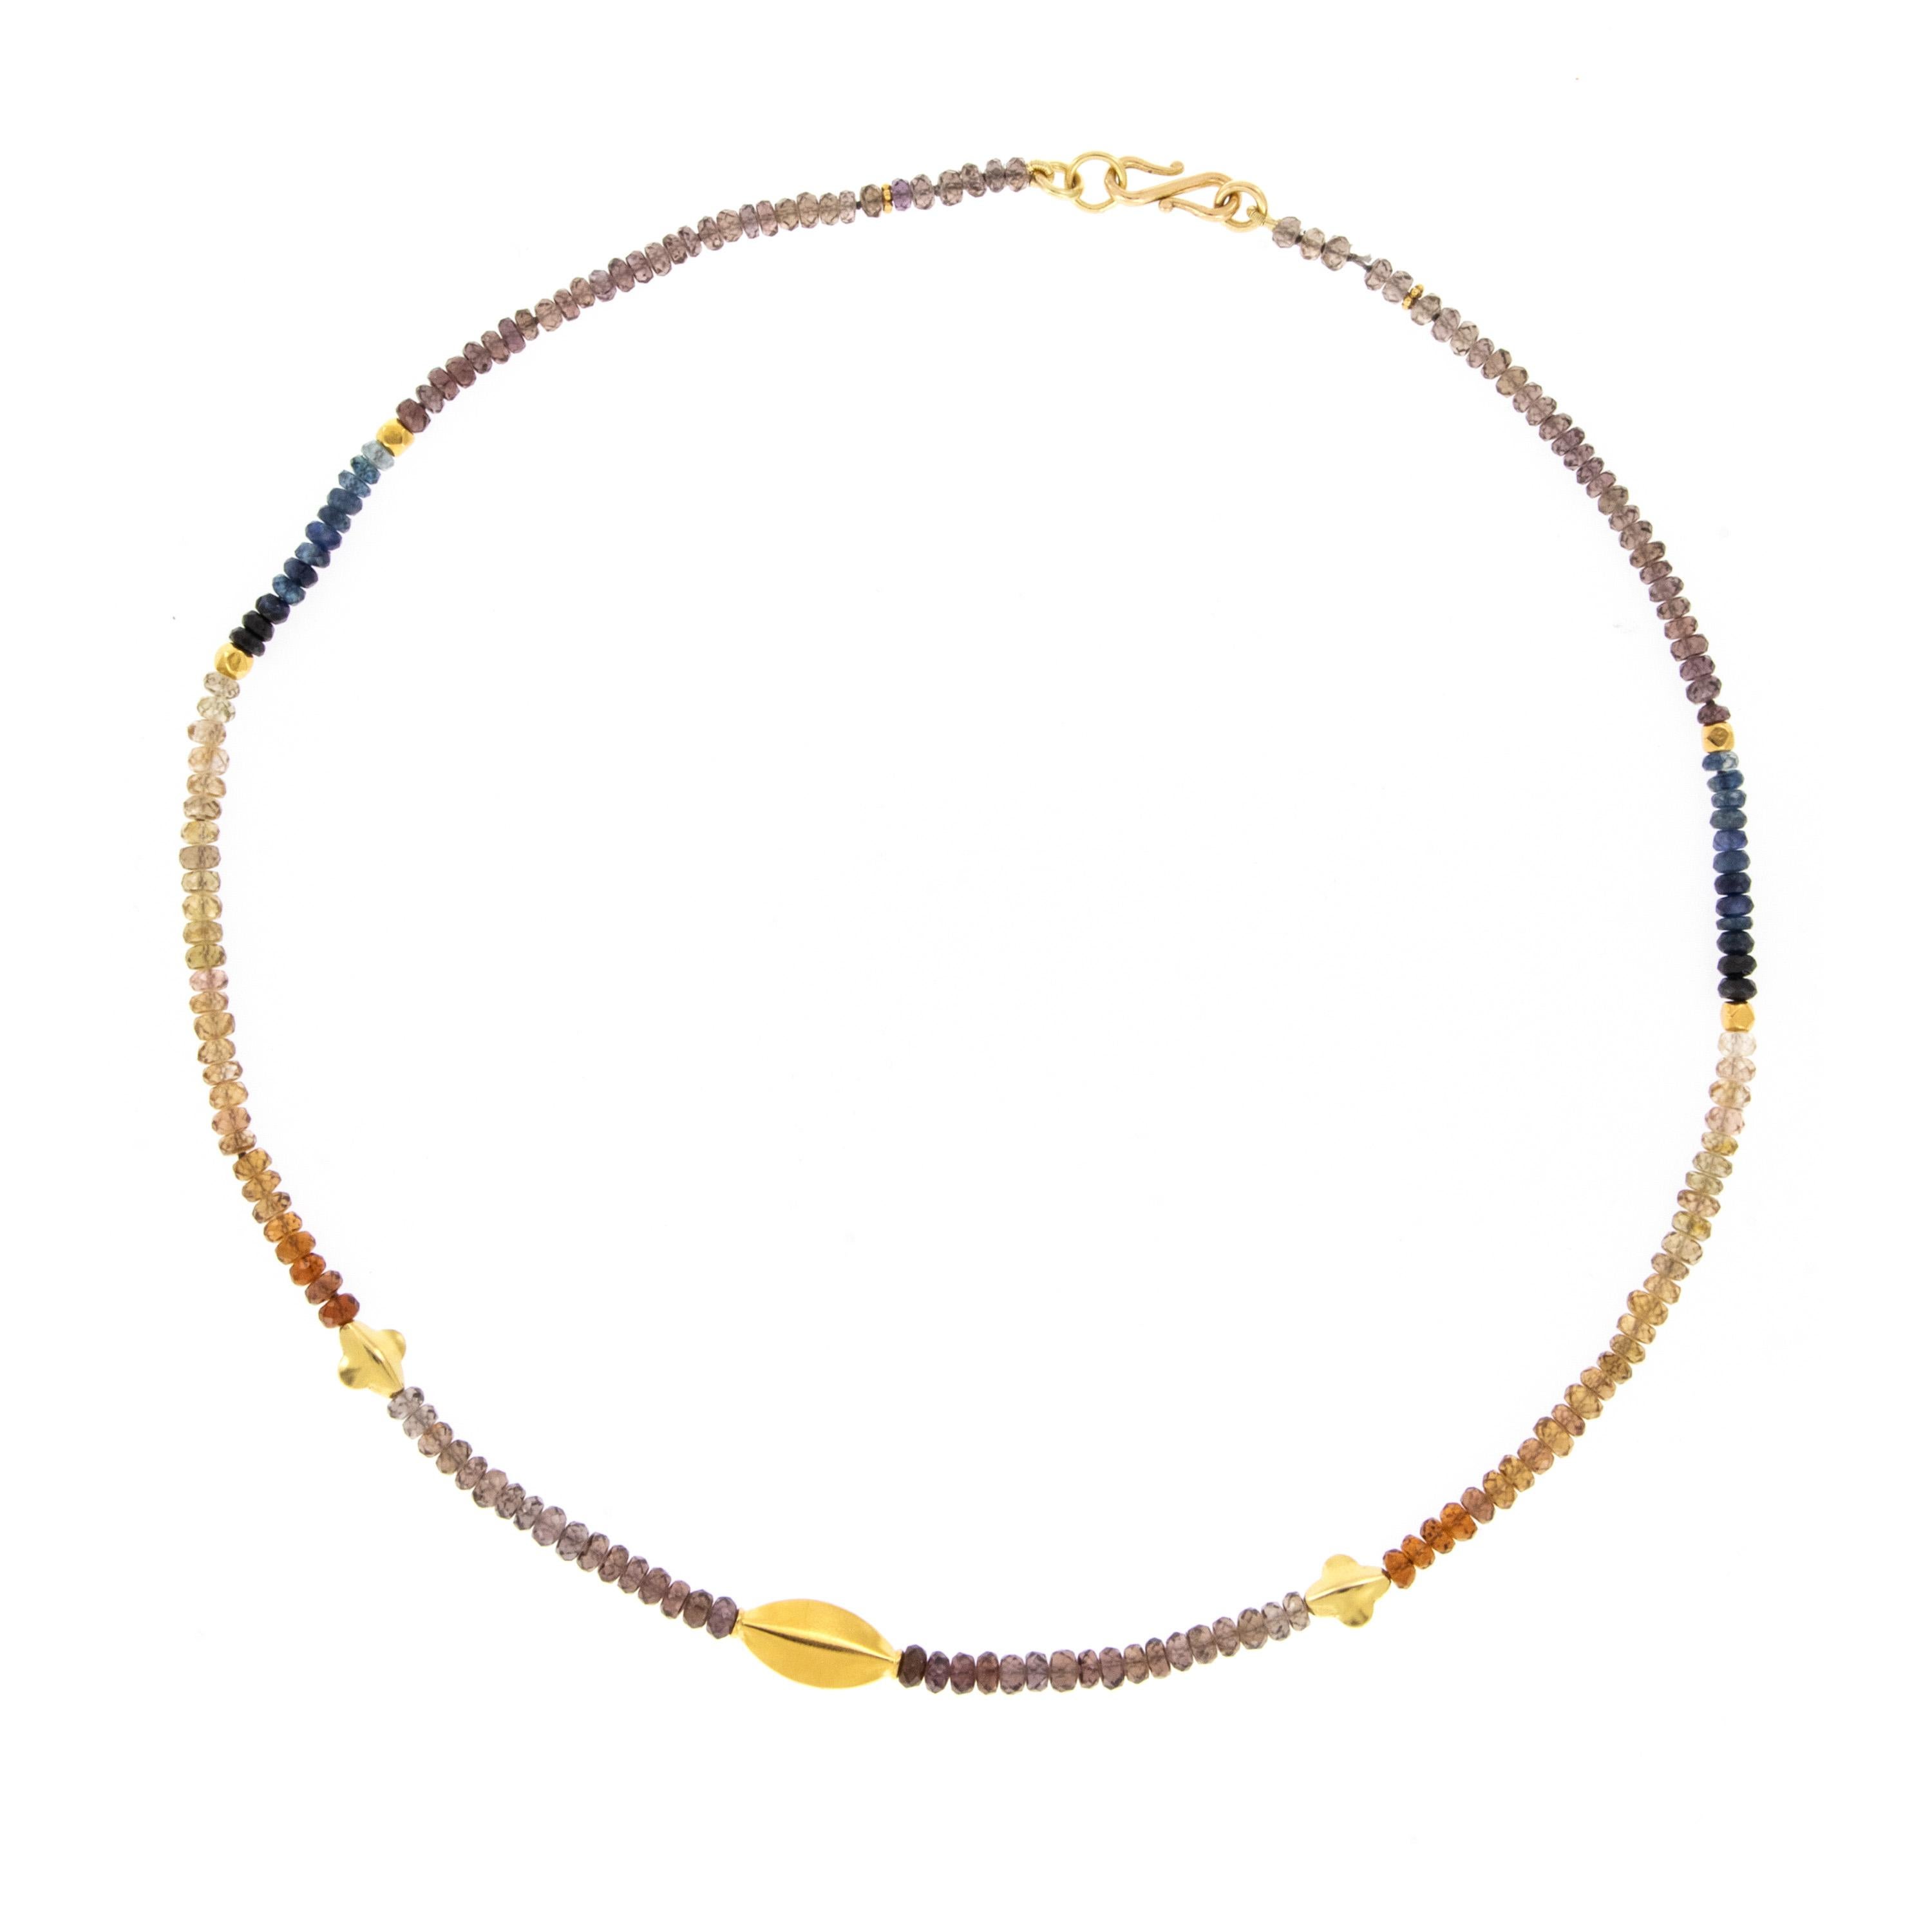 Beautiful and softly hued faceted sapphire beads are hand strung in ombre' fashion accented with satin finished 22 karat yellow gold station beads and is 16